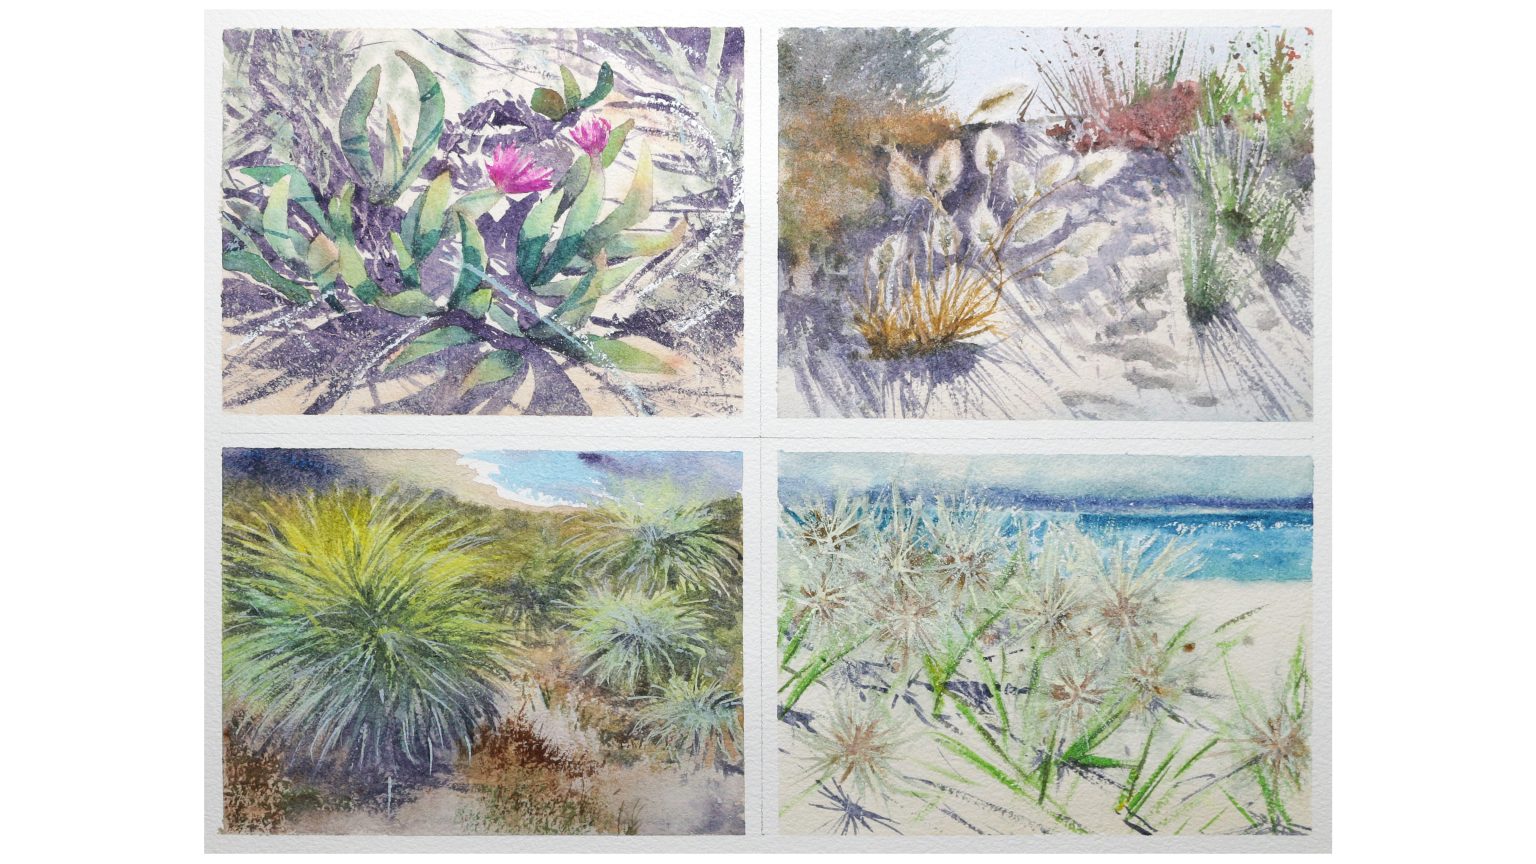 Lesson 4 Sample Paintings Seagrasses anad Textures (Pigface, Bunny Tails and Dune Grass, Tussock Grass, Spinifex Grass